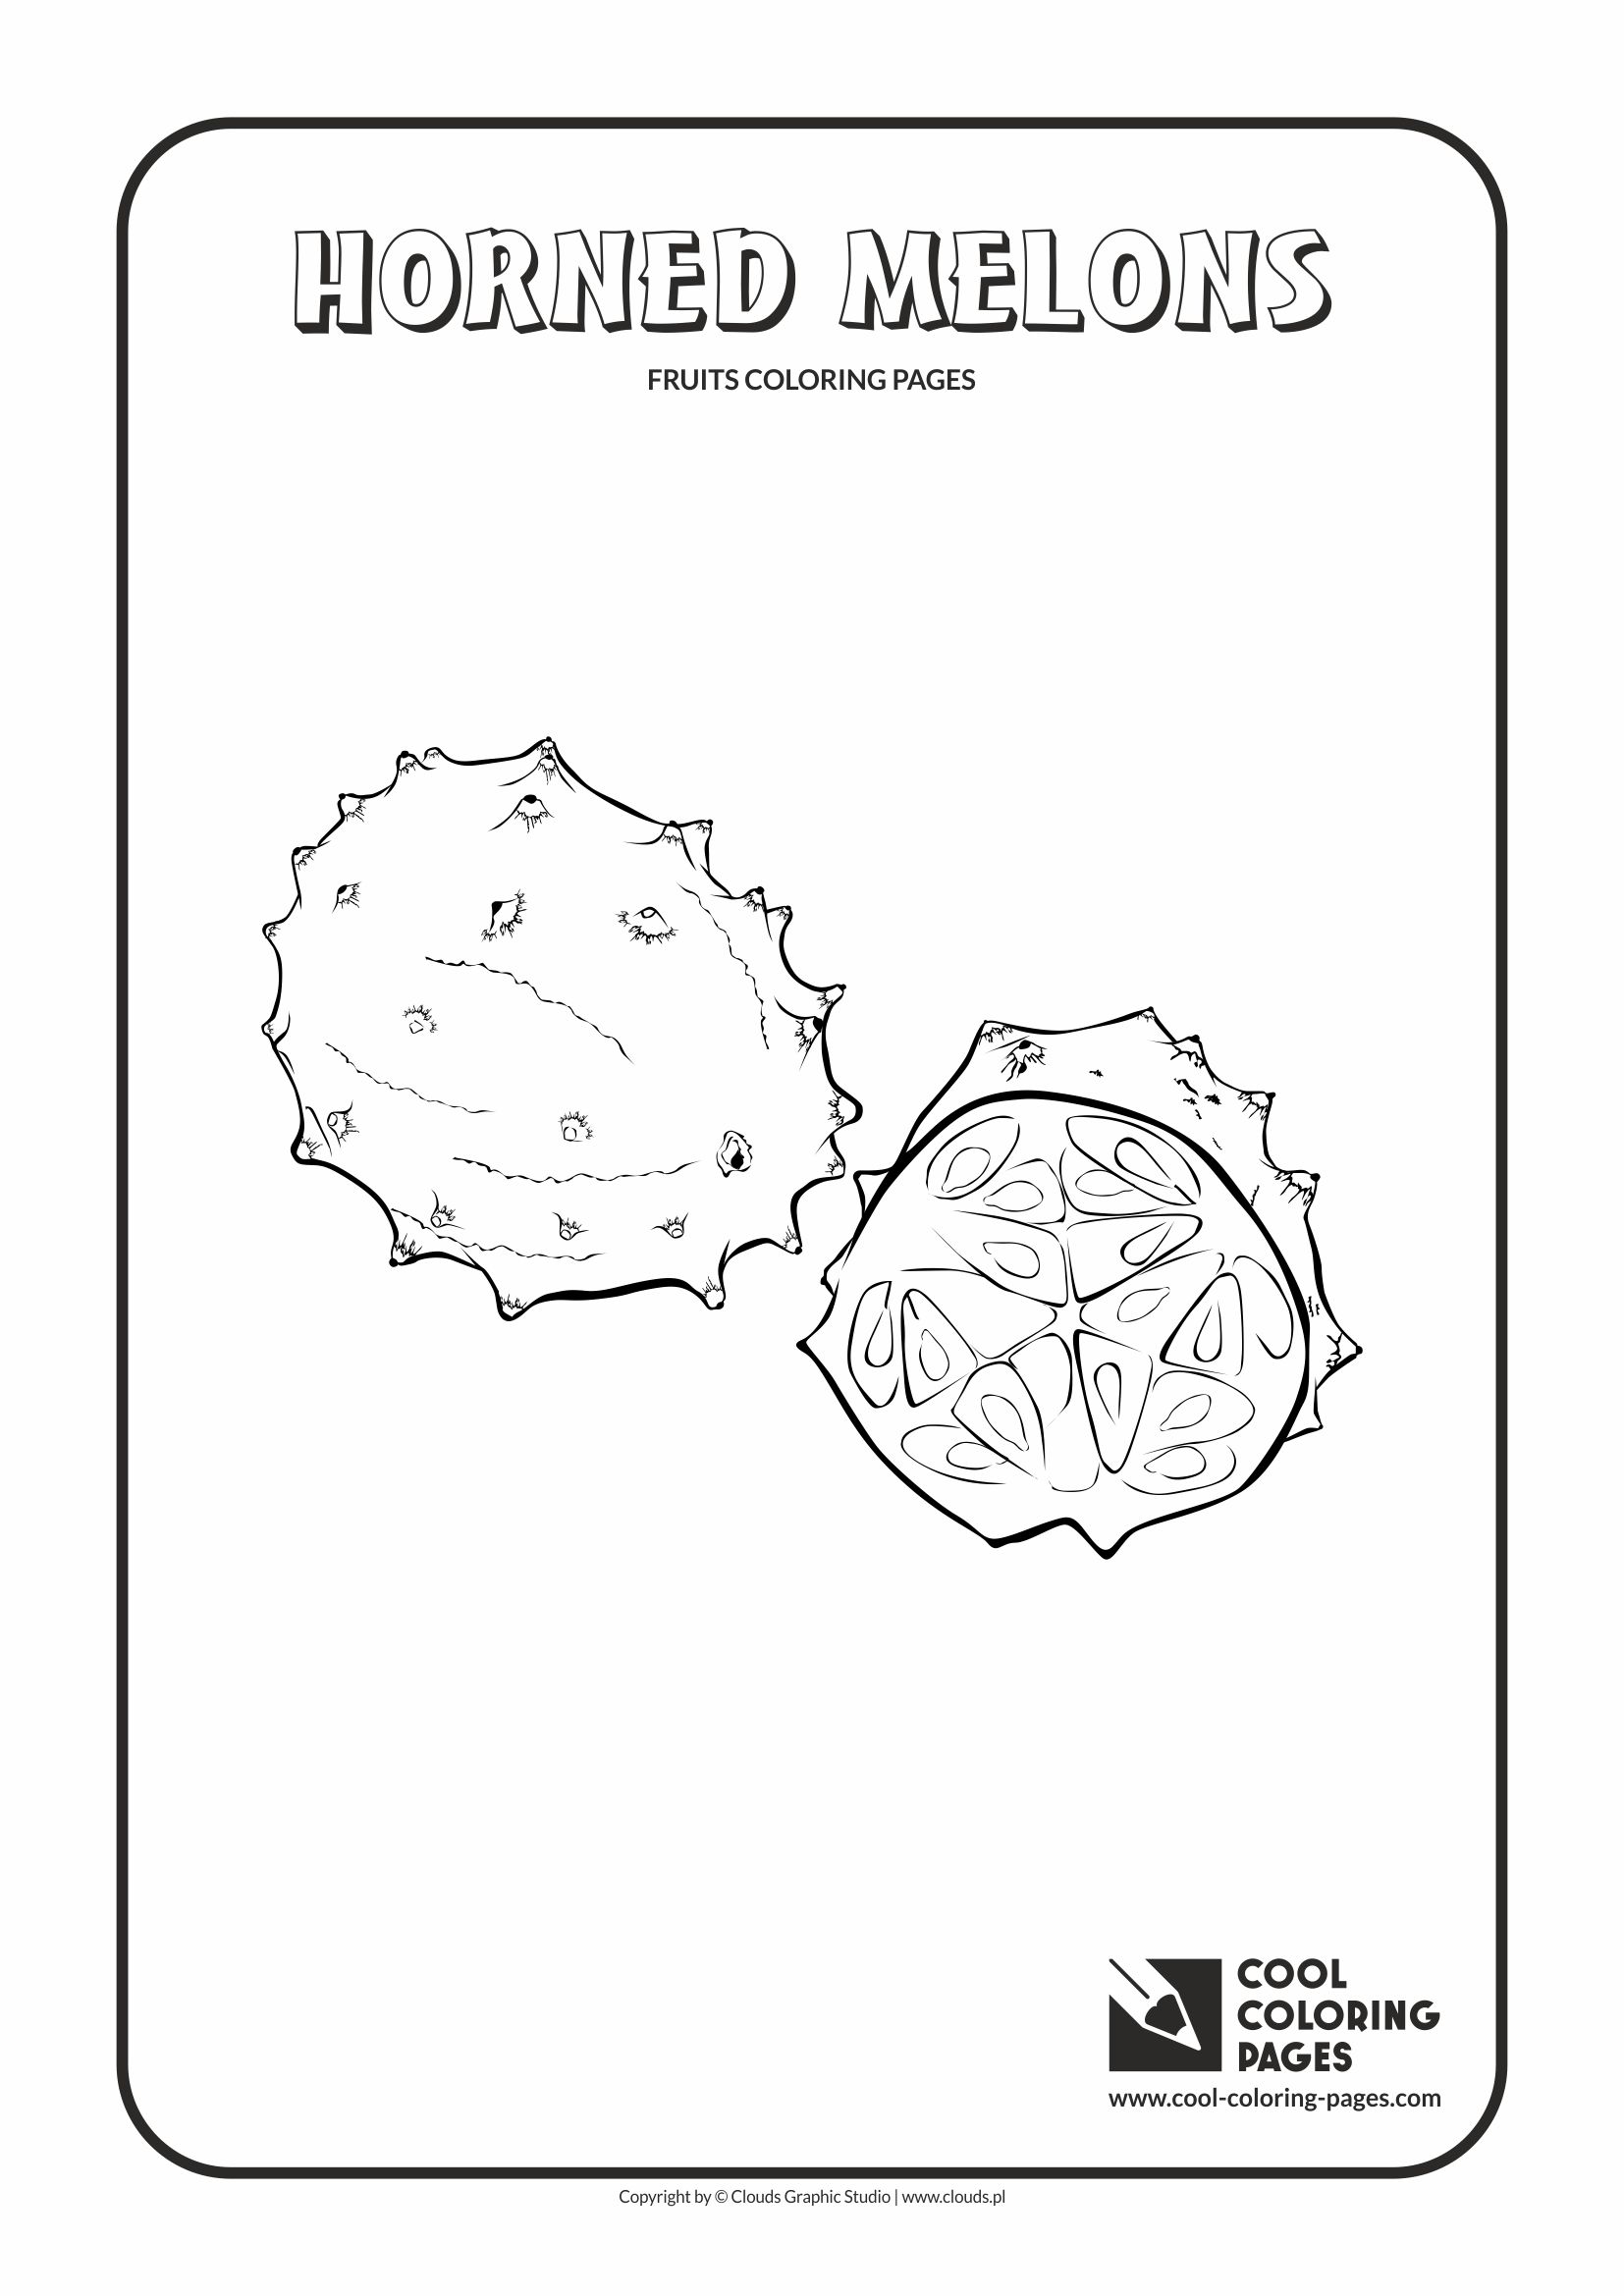 Cool Coloring Pages - Plants / Horned melons / Coloring page with horned melons